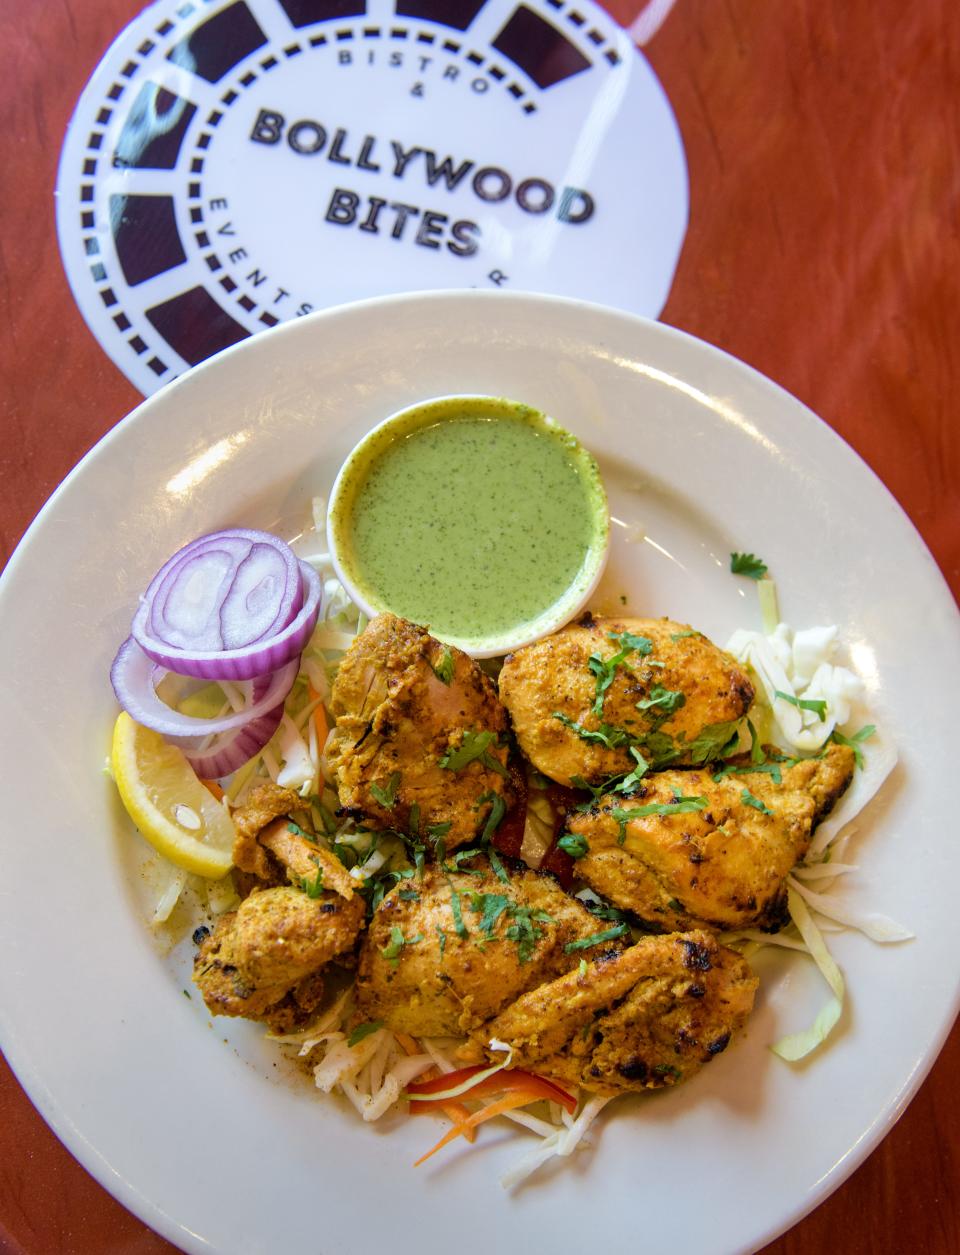 Malang Malai Chicken Tikka – pieces of chicken marinated in yogurt, cashew paste and aromatic spices – at the new Indian restaurant Bollywood Bites in downtown Peoria.